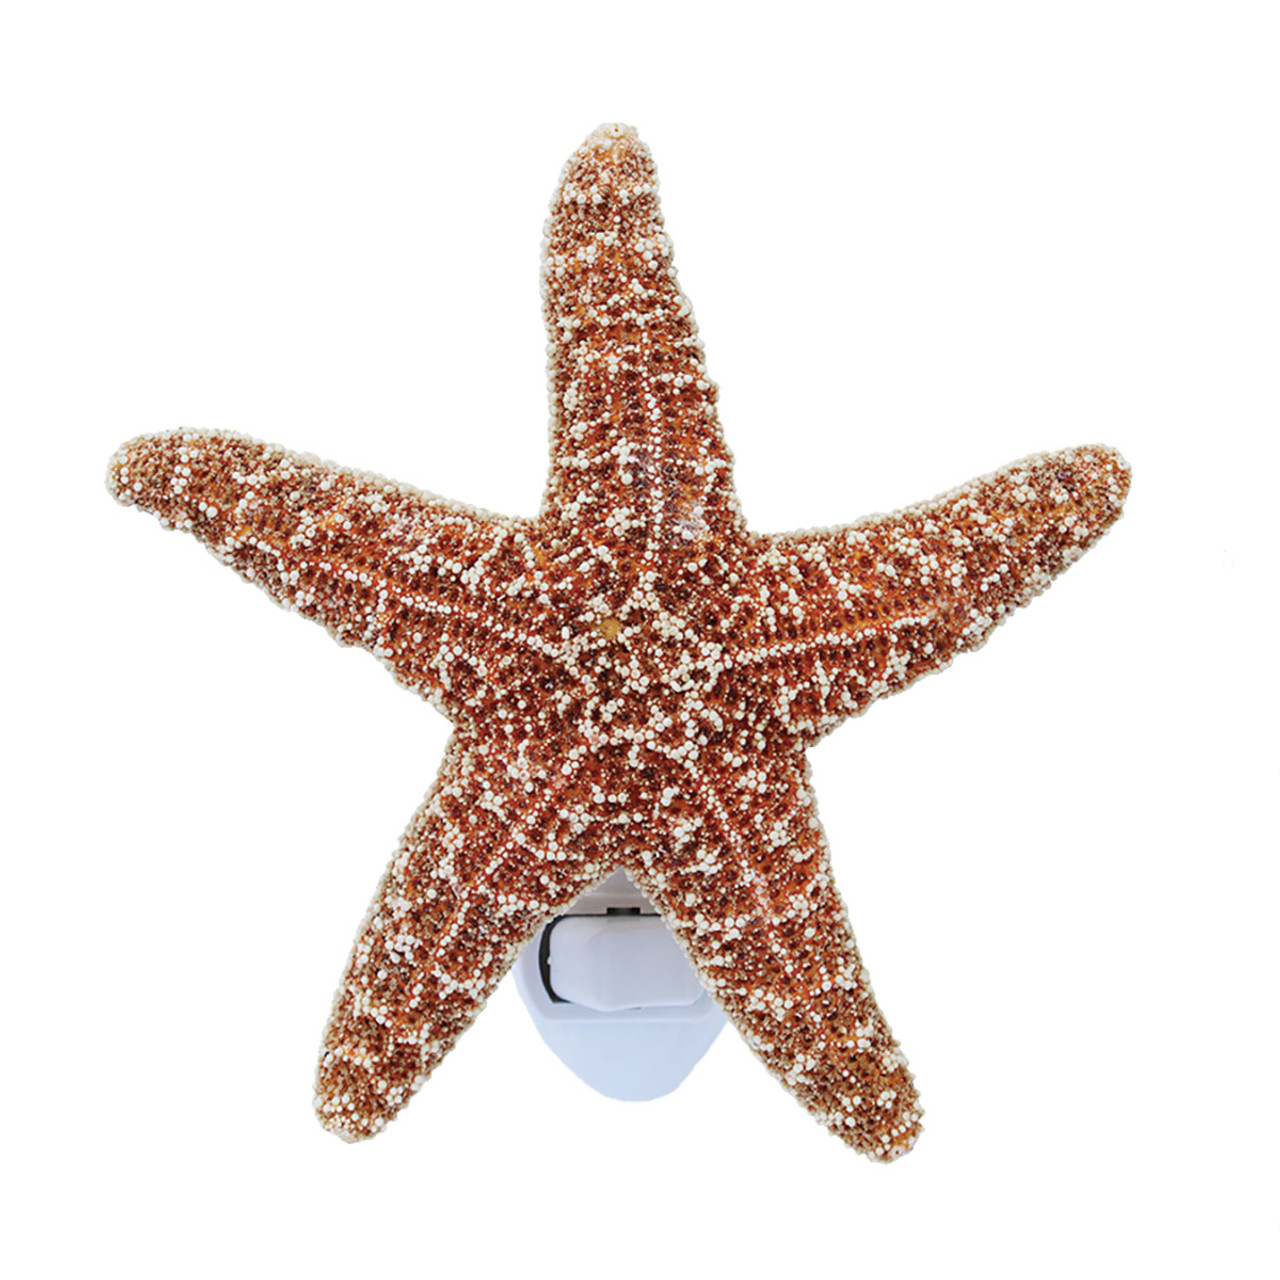 Starfish 2 Real Large Brown Sugar Starfish for Crafts and Decor